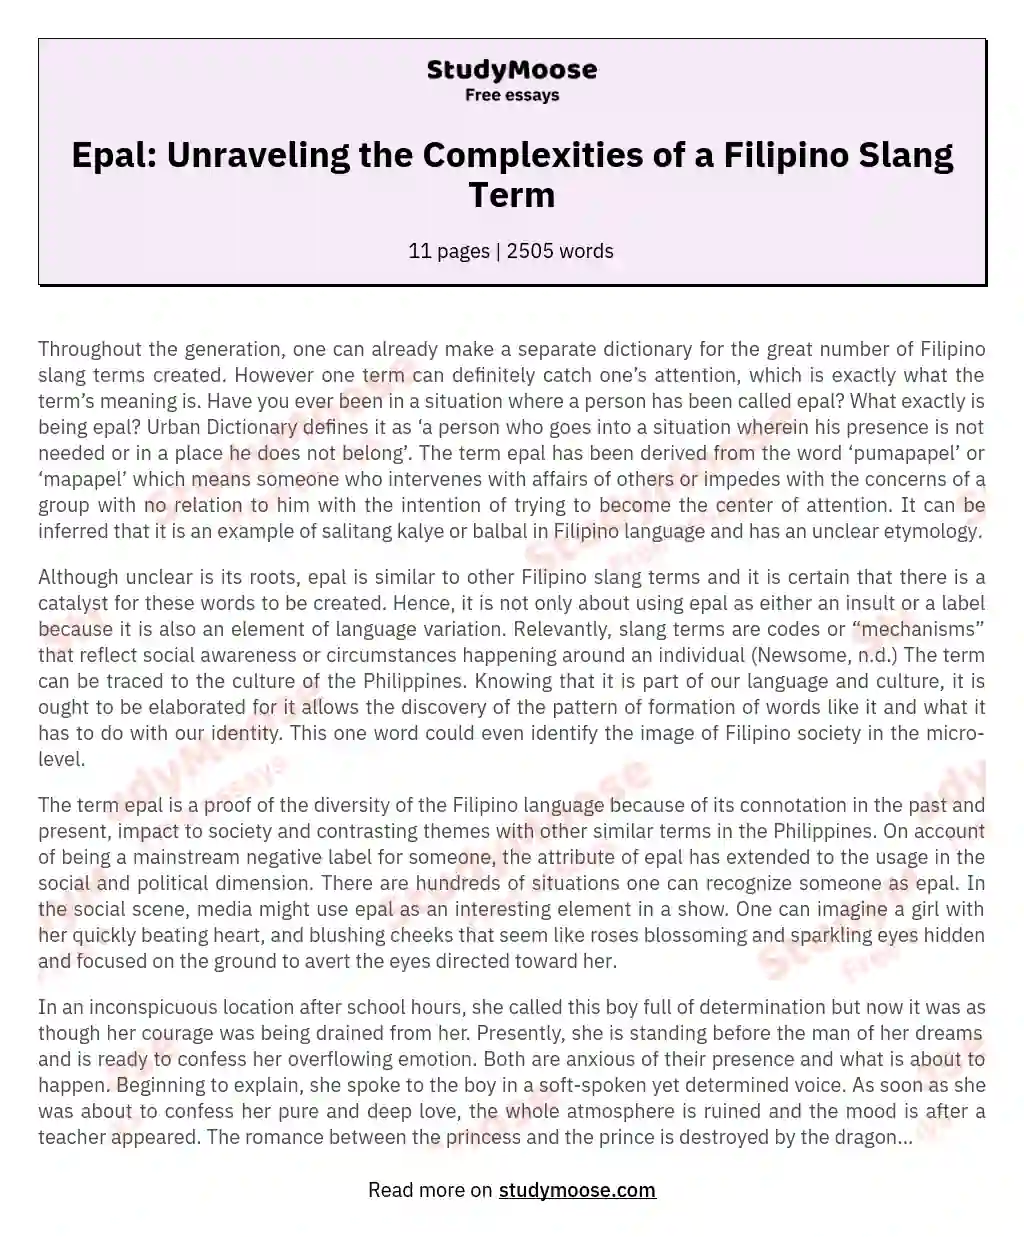 Epal: Unraveling the Complexities of a Filipino Slang Term essay